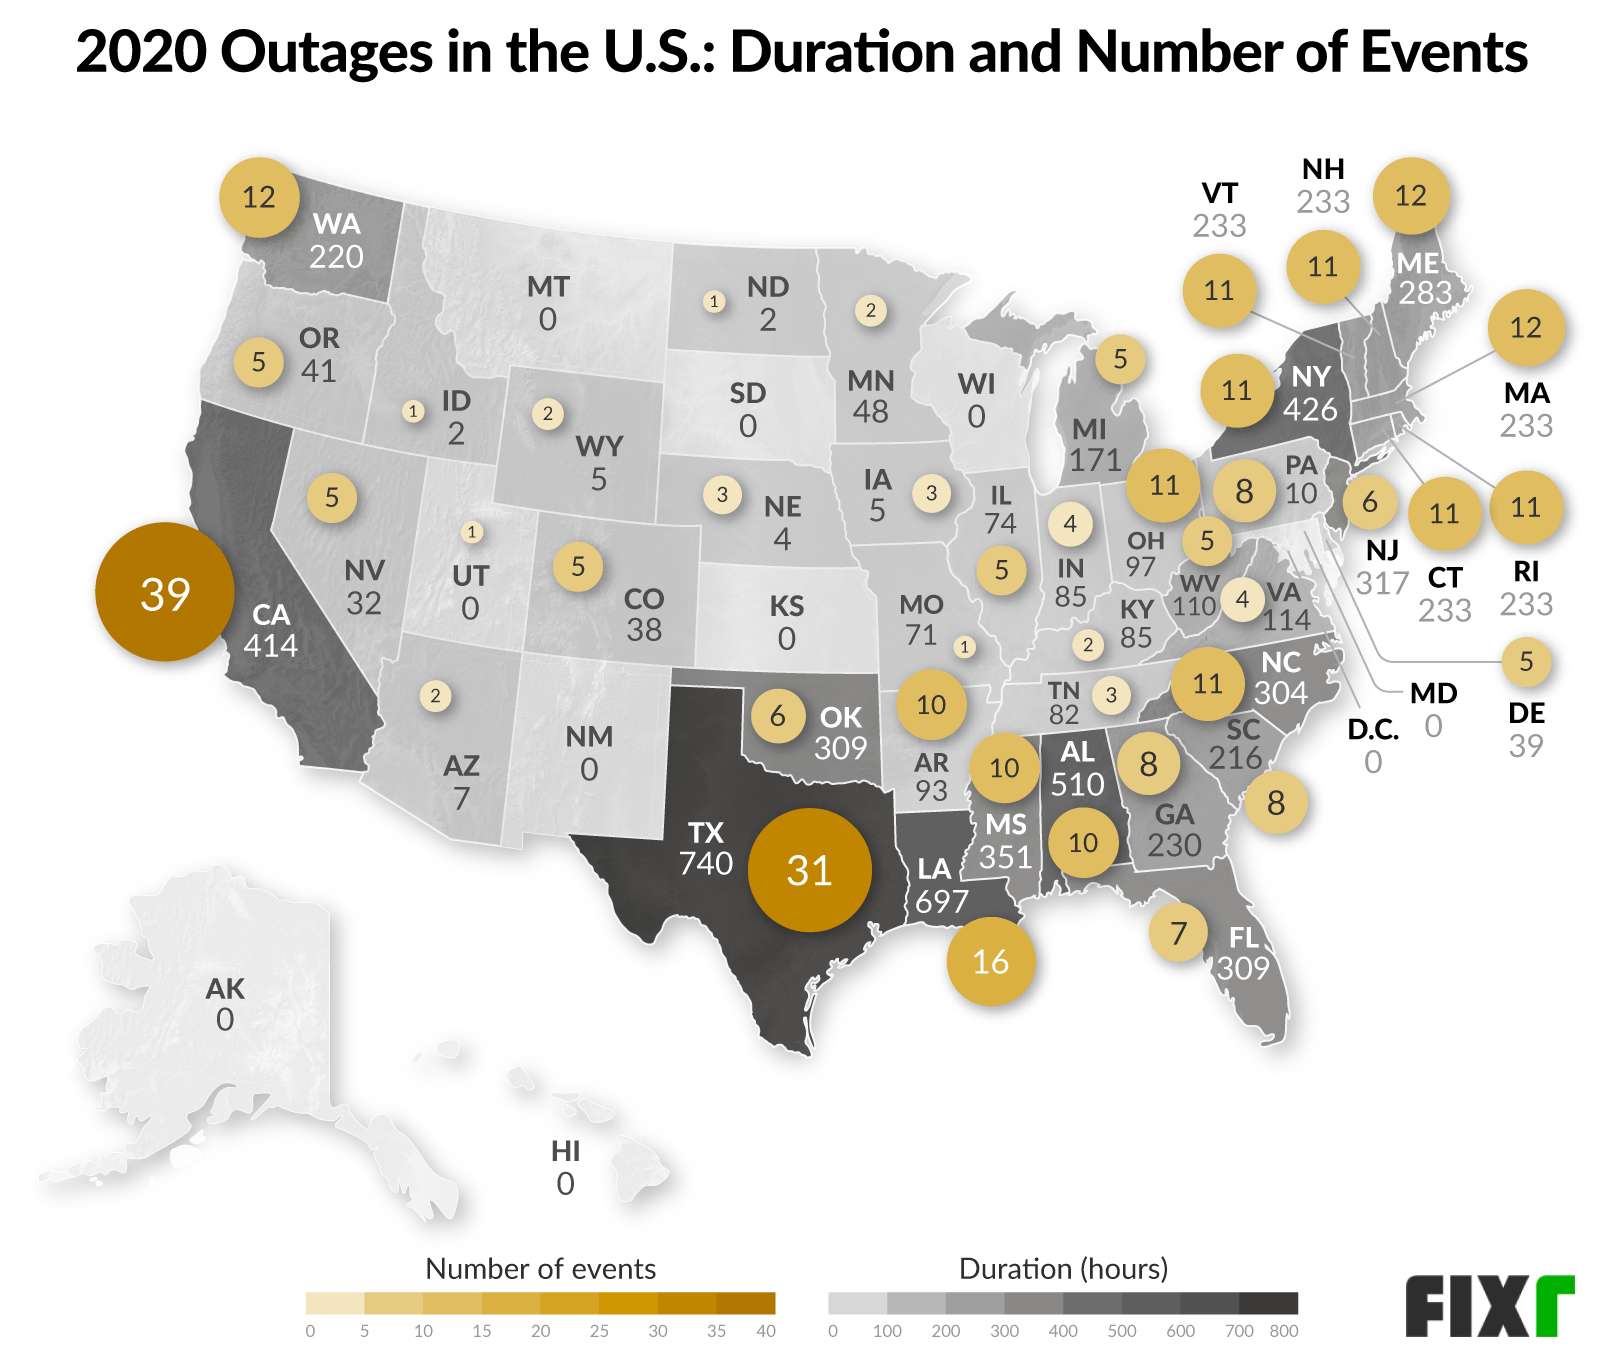 Map of US Power Outages in Each State - Texas, Luisiana, California, New York etc.